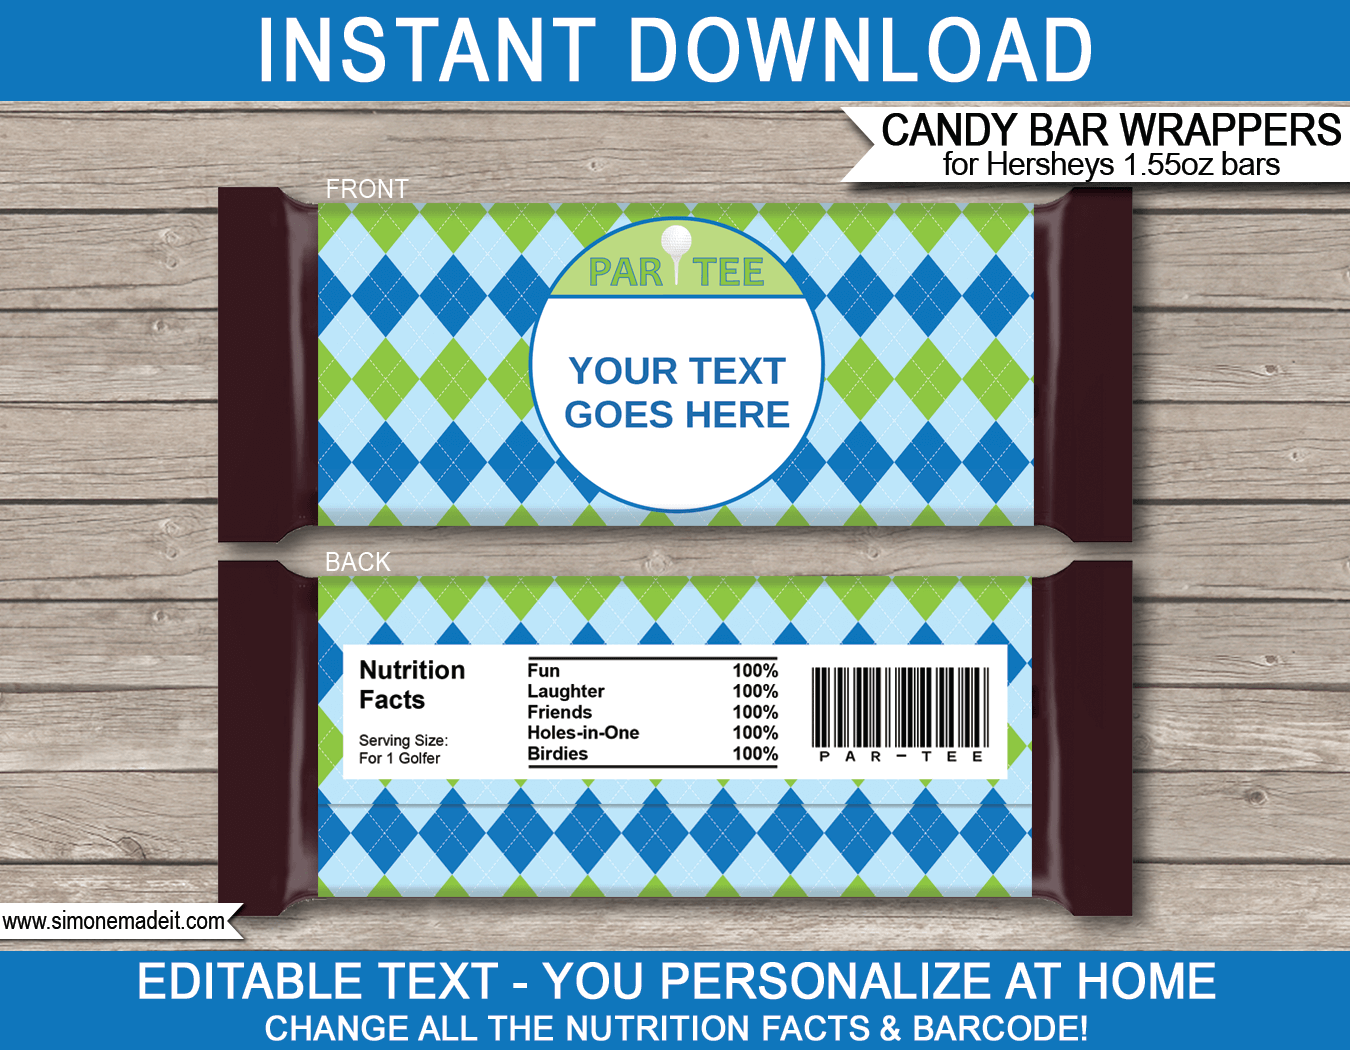 Golf Hershey Candy Bar Wrappers | Par-tee | Blue Green Argyle | Birthday Party Favors | Personalized Candy Bars | Editable Template | INSTANT DOWNLOAD $3.00 via simonemadeit.com